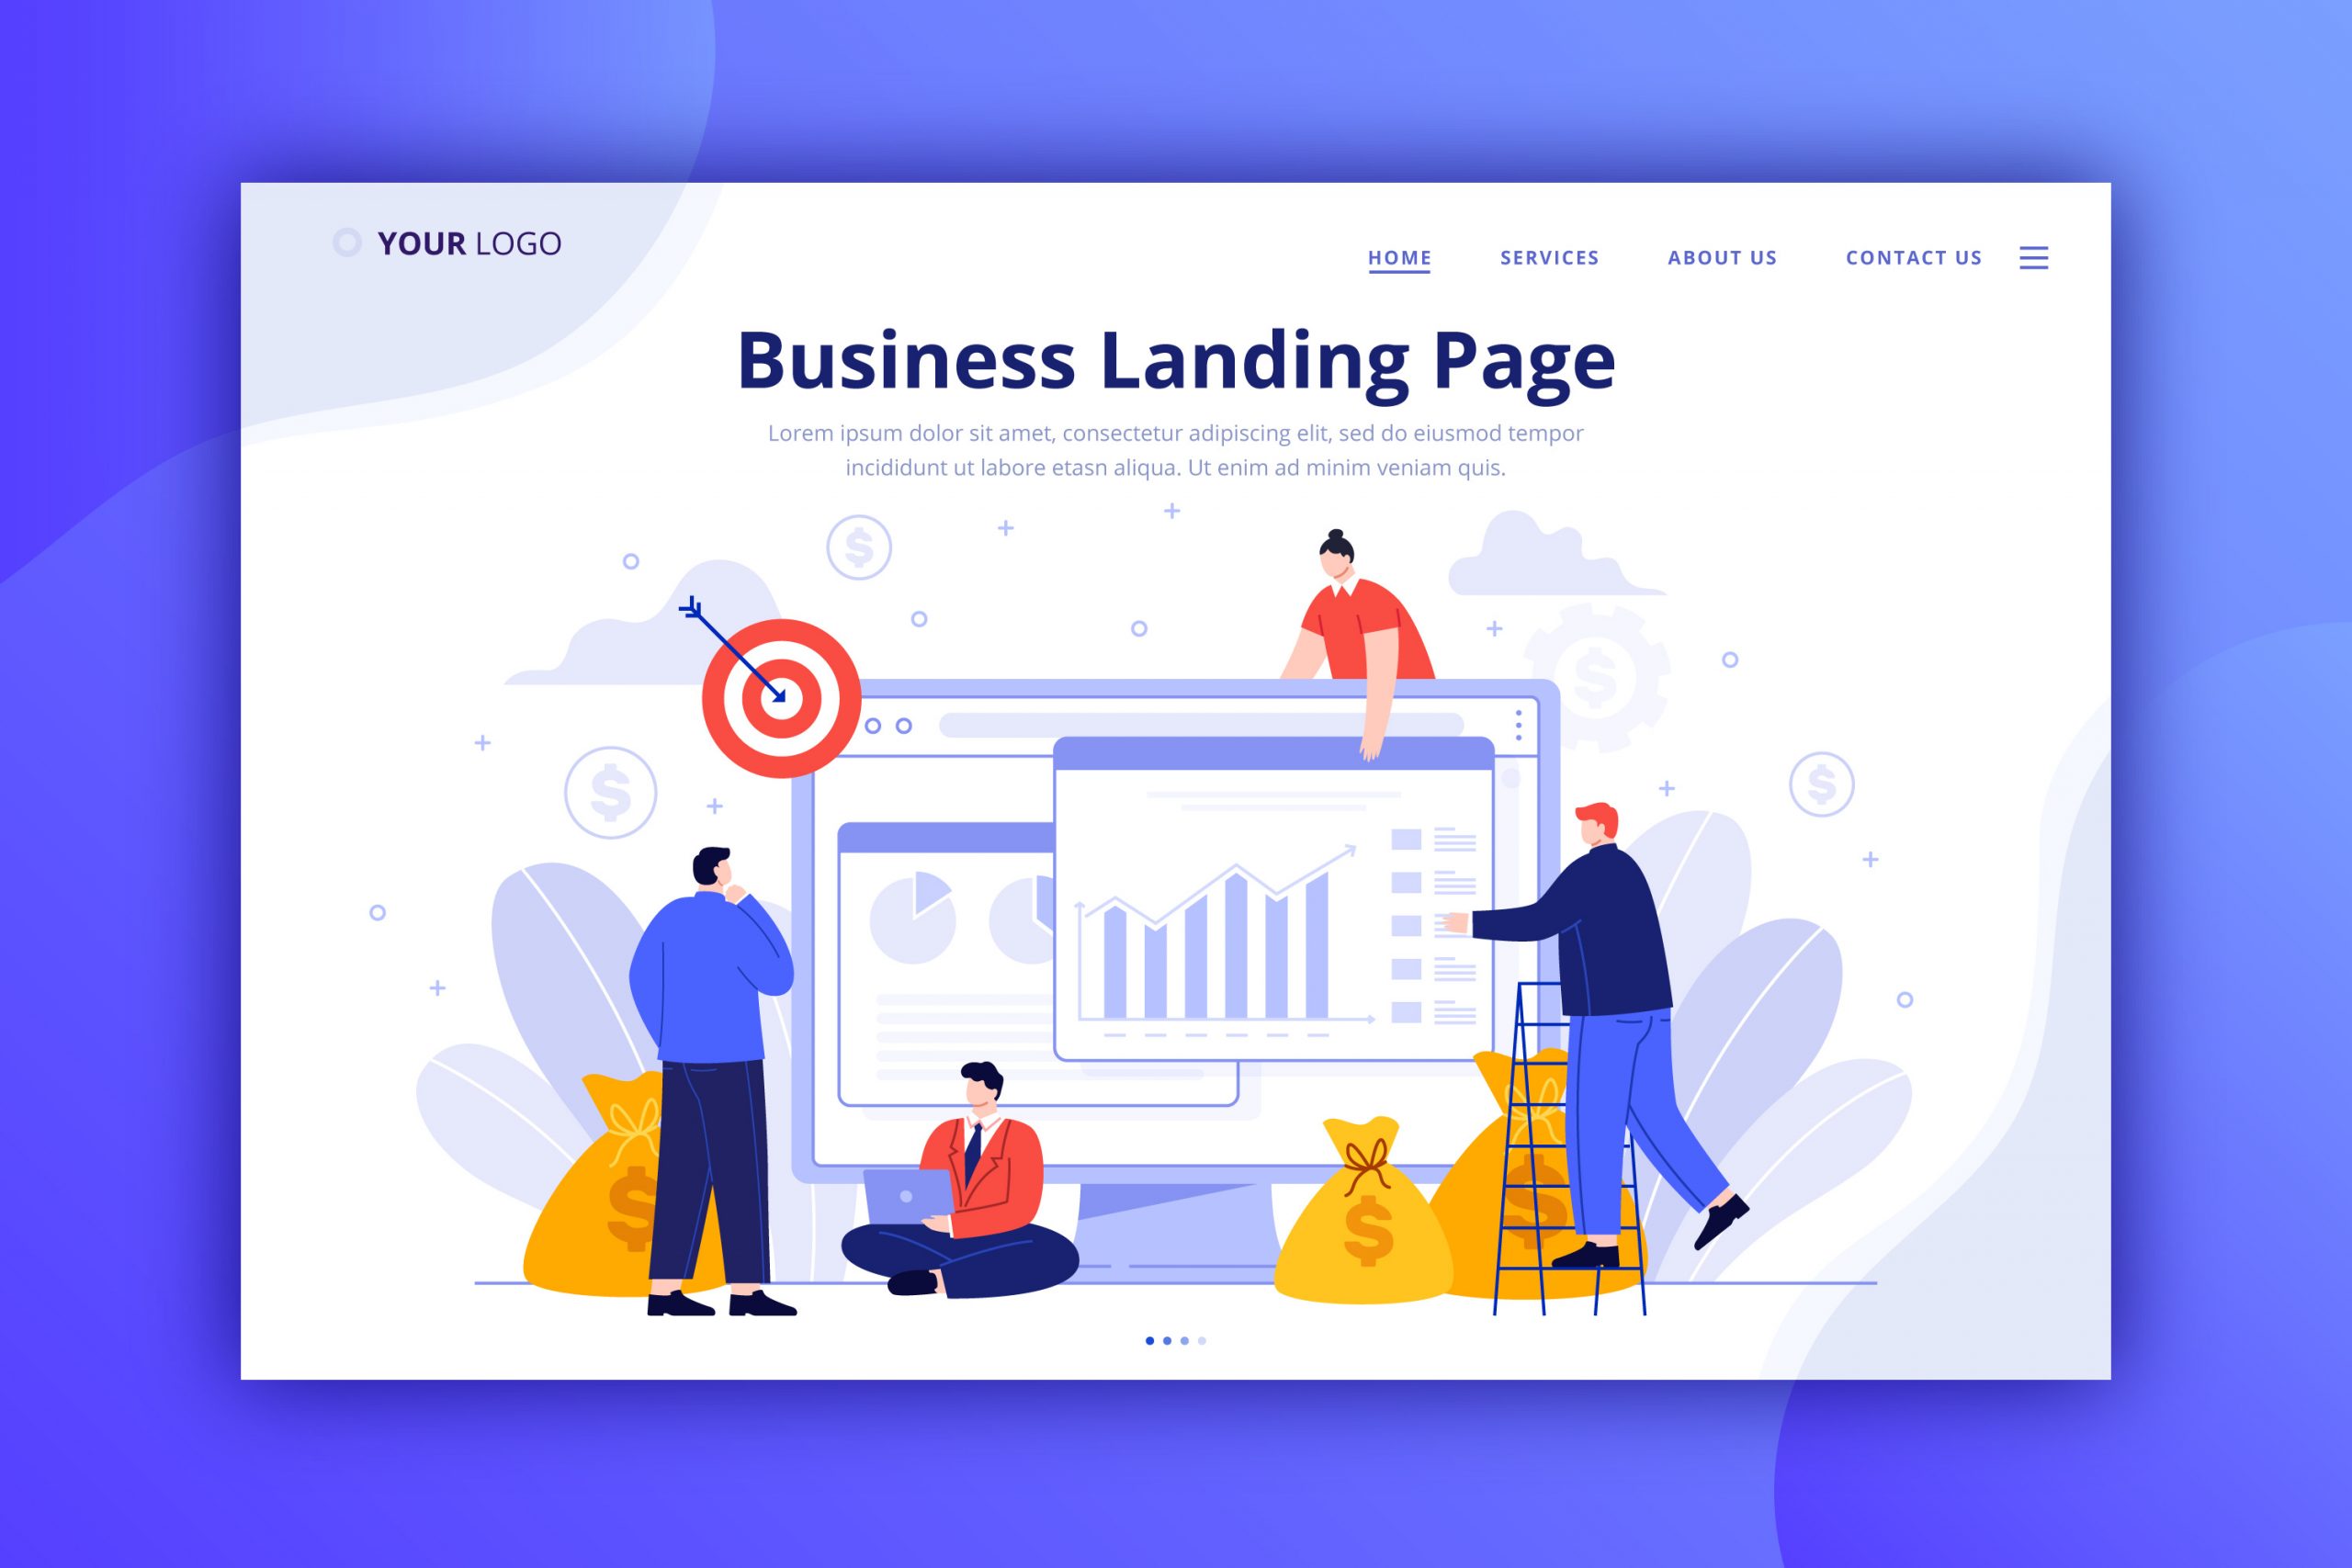 5 Key Components Of A Landing Page To Capture Leads